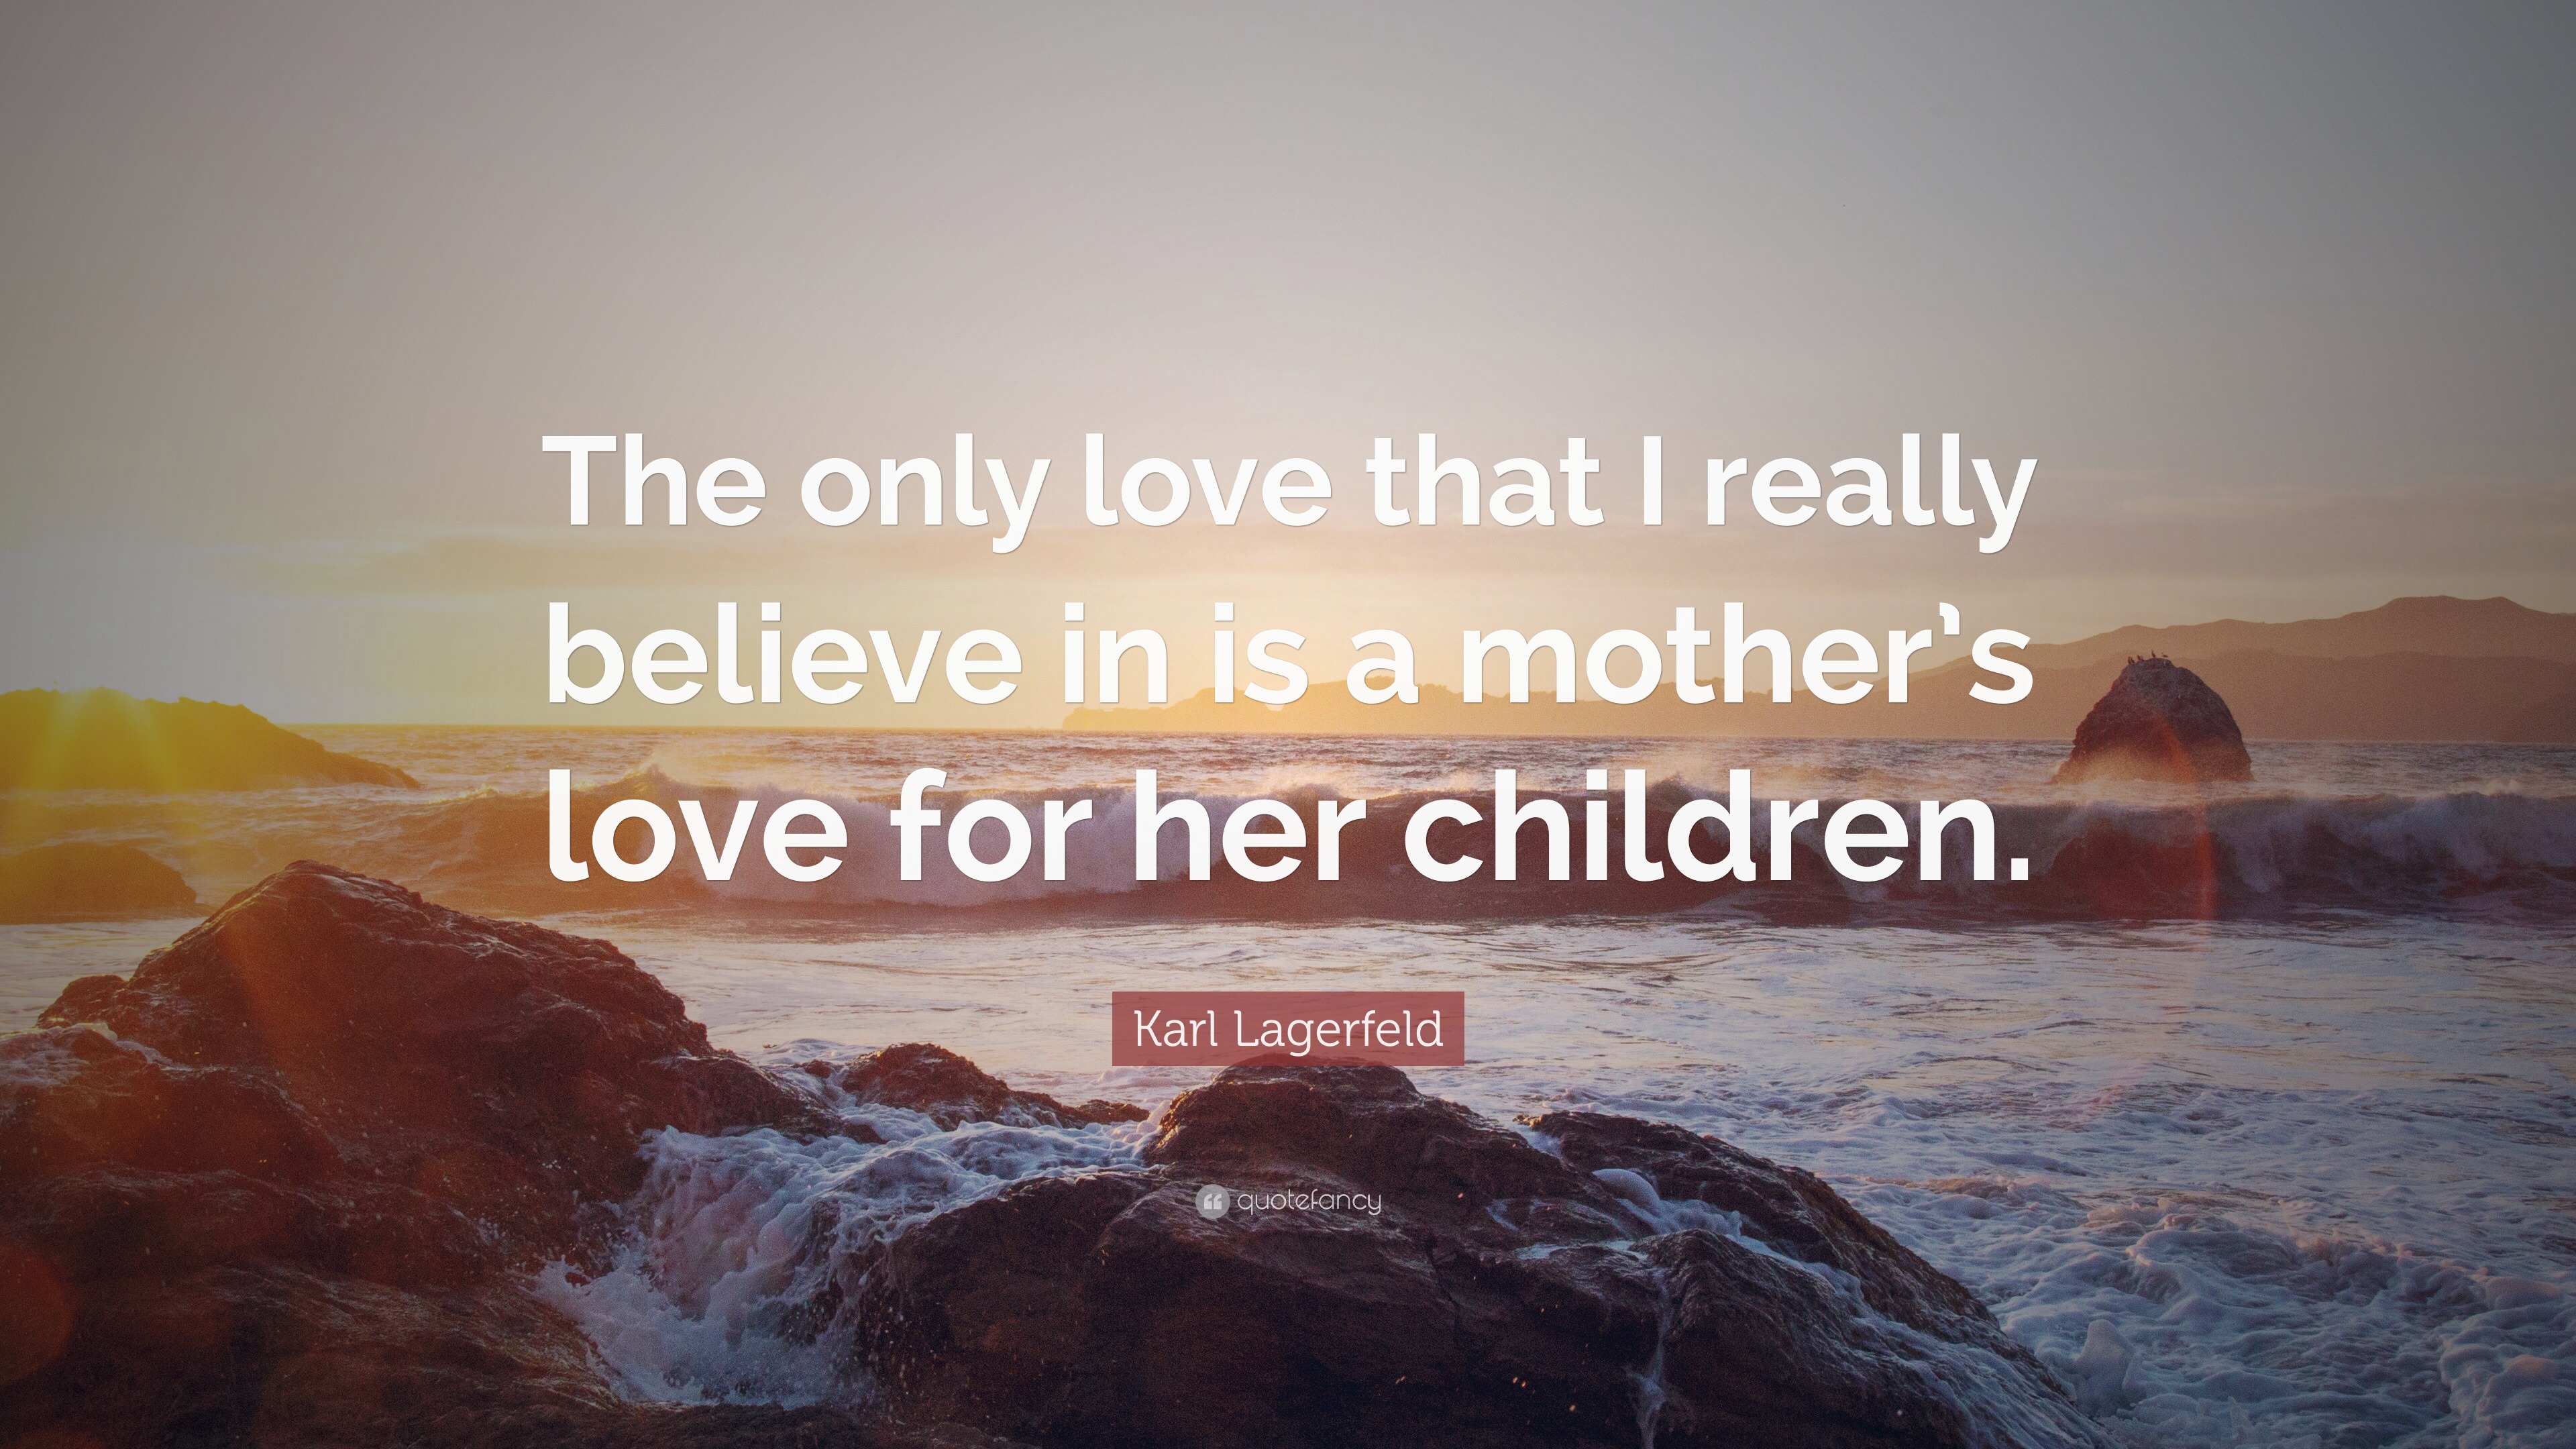 Karl Lagerfeld Quote: “The only love that I really believe in is a ...